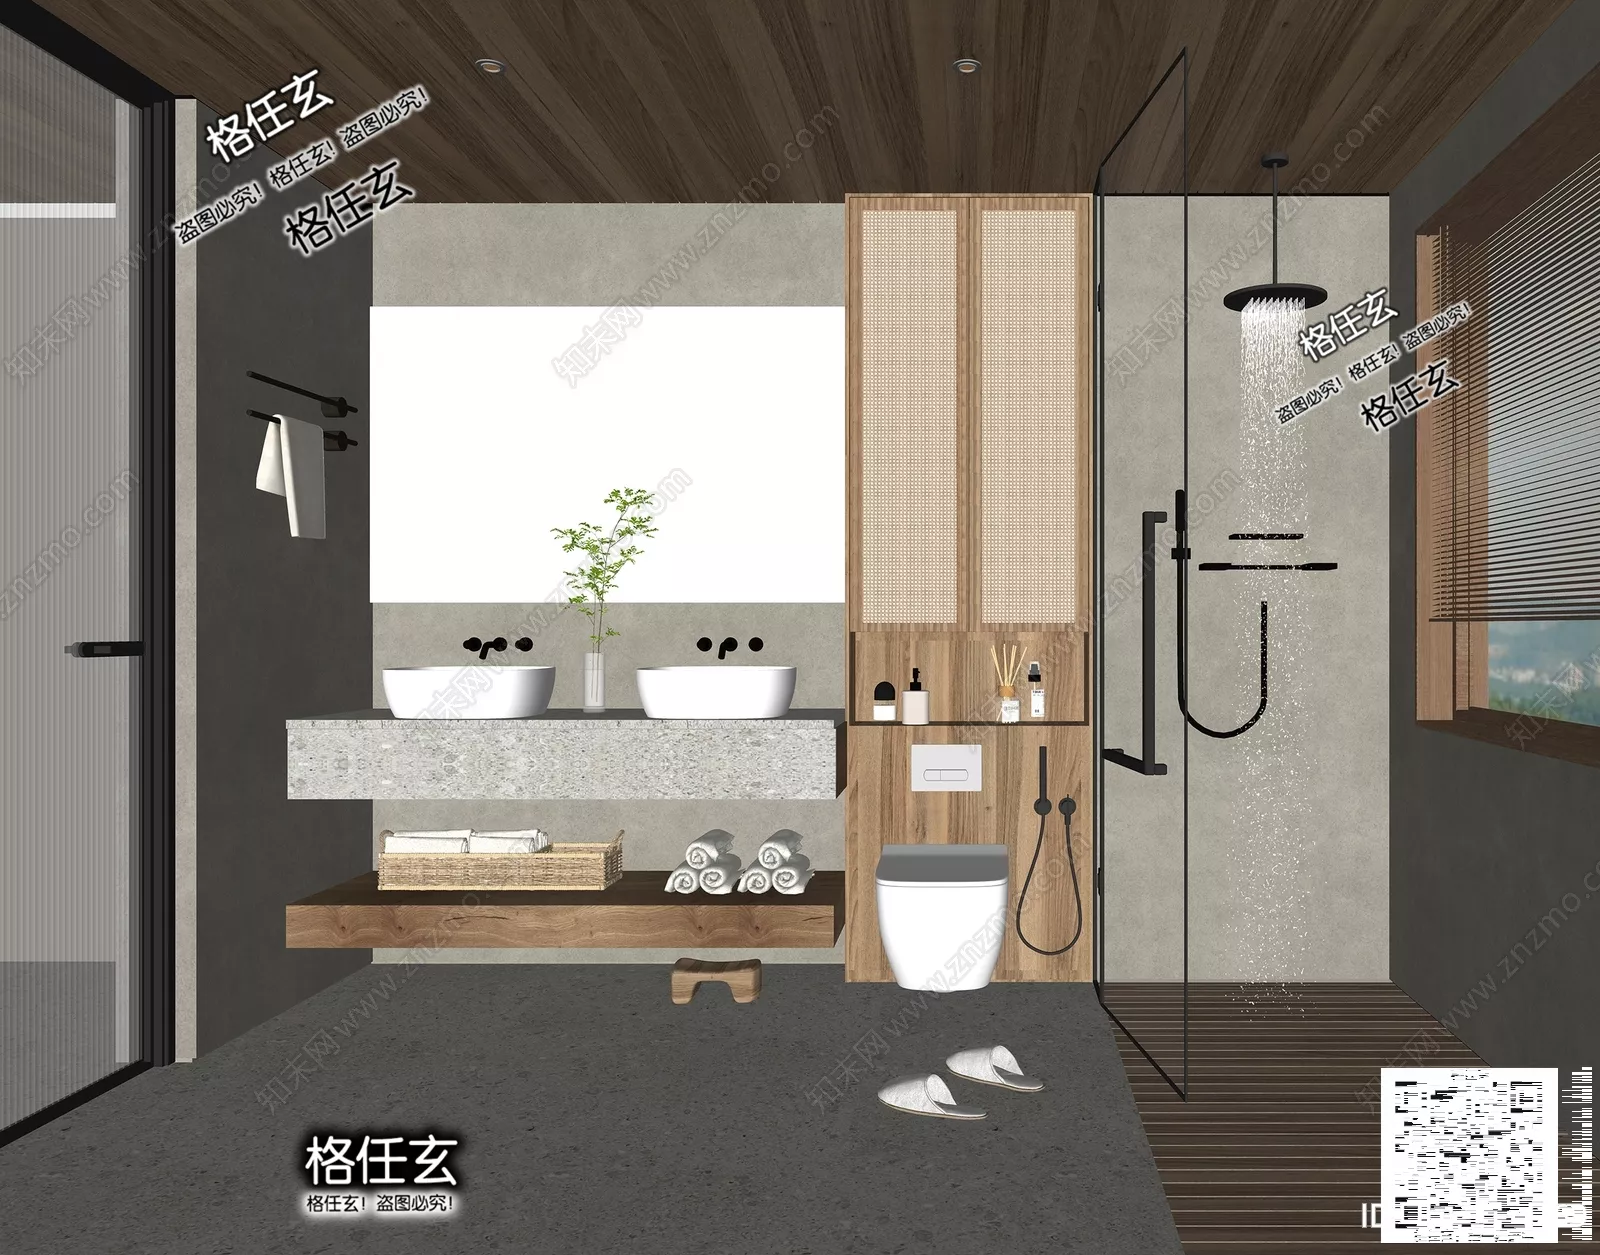 WABI SABI INTERIOR COLLECTION - SKETCHUP 3D SCENE - VRAY OR ENSCAPE - ID17782